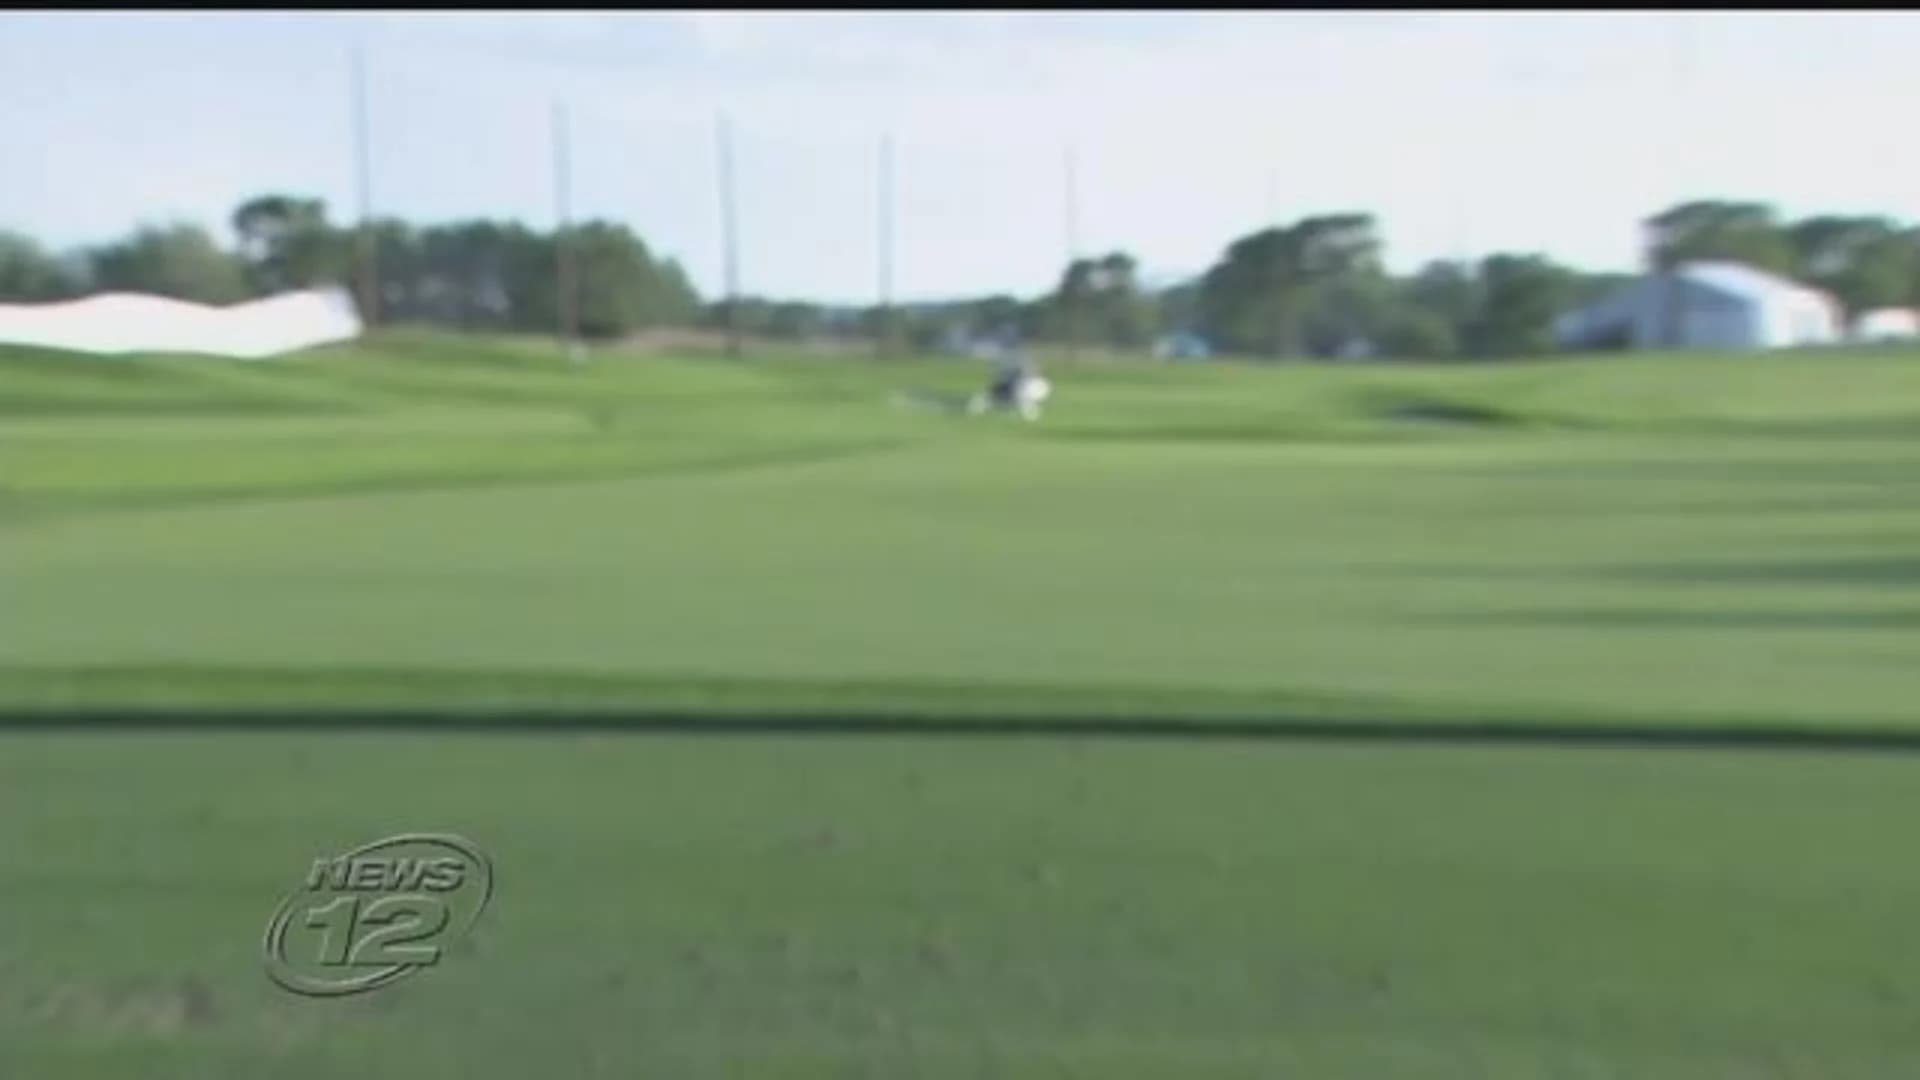 On The Road: Northern Trust Golf Tournament in Jersey City